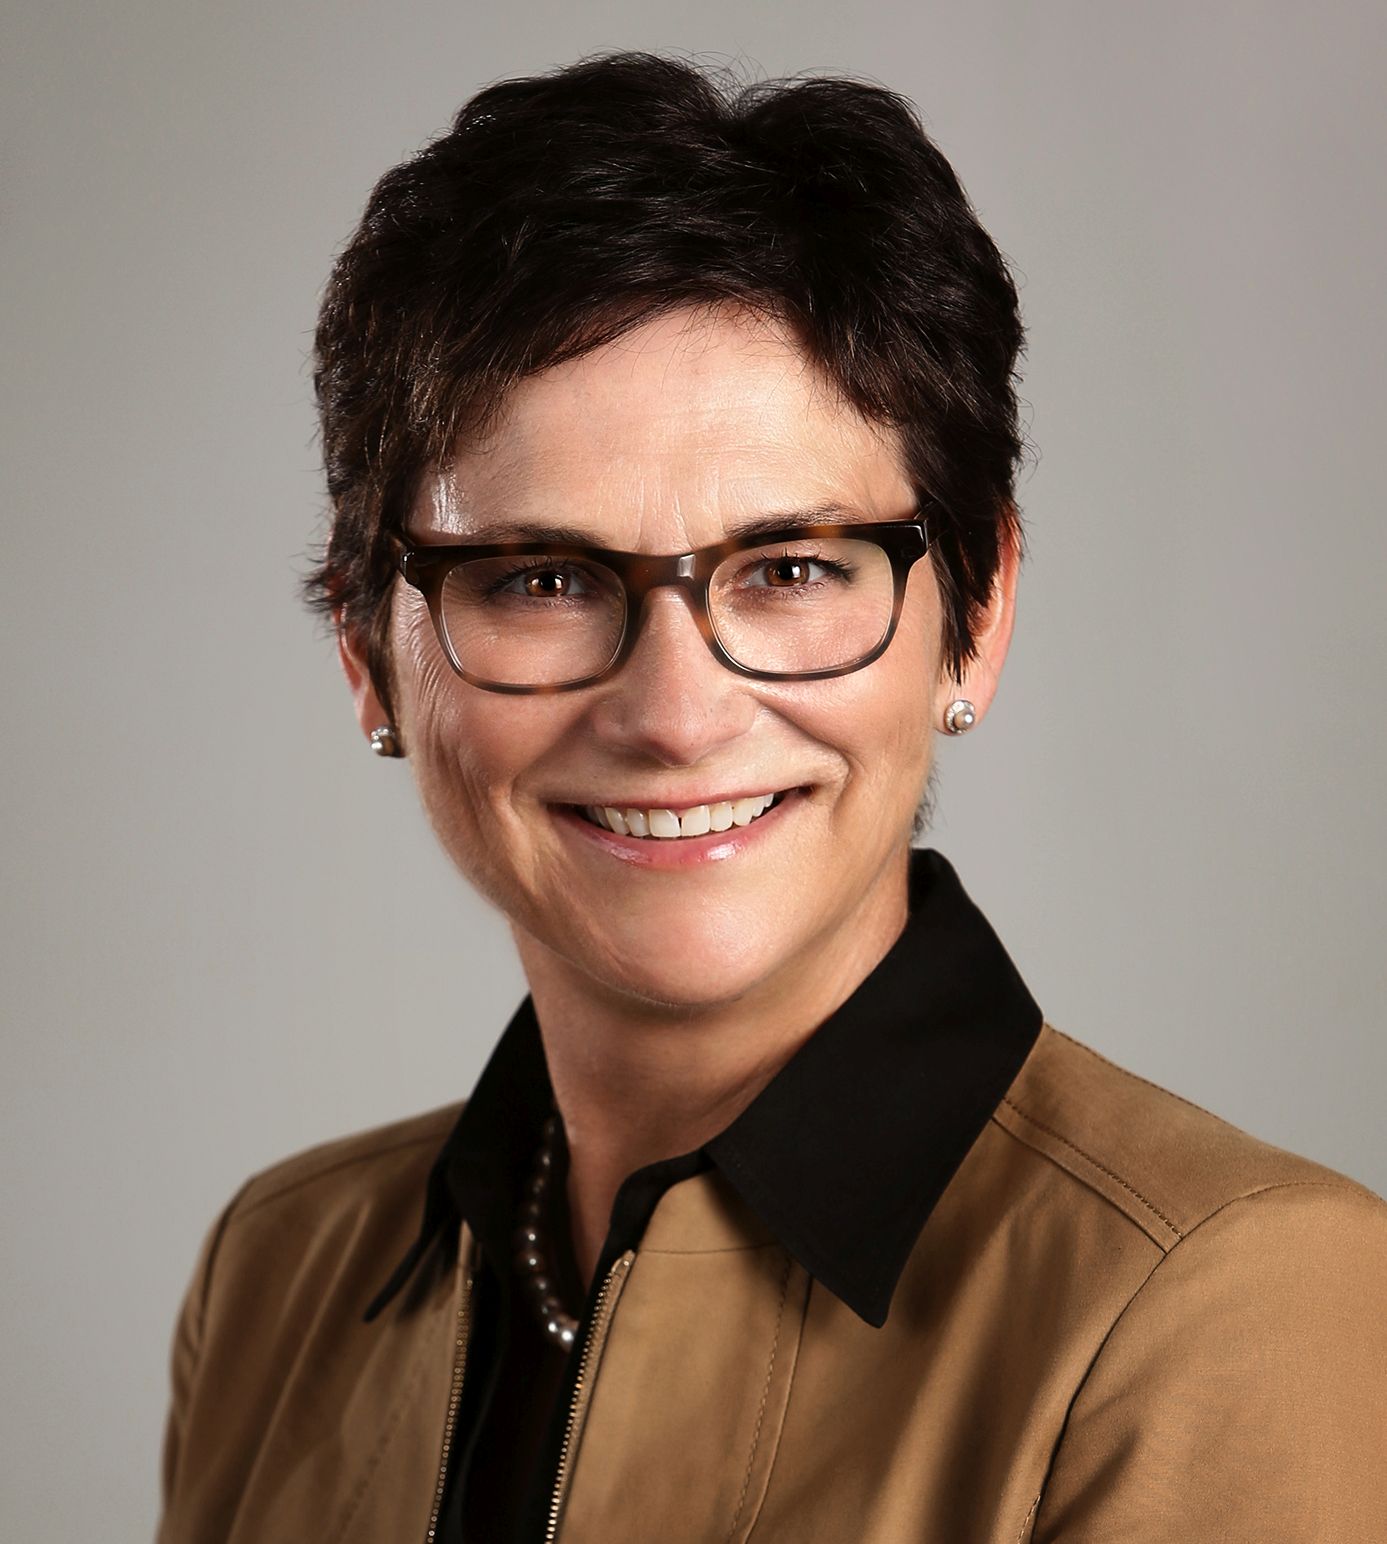 Mary C. Brown is President of Campbell Newman Asset Management